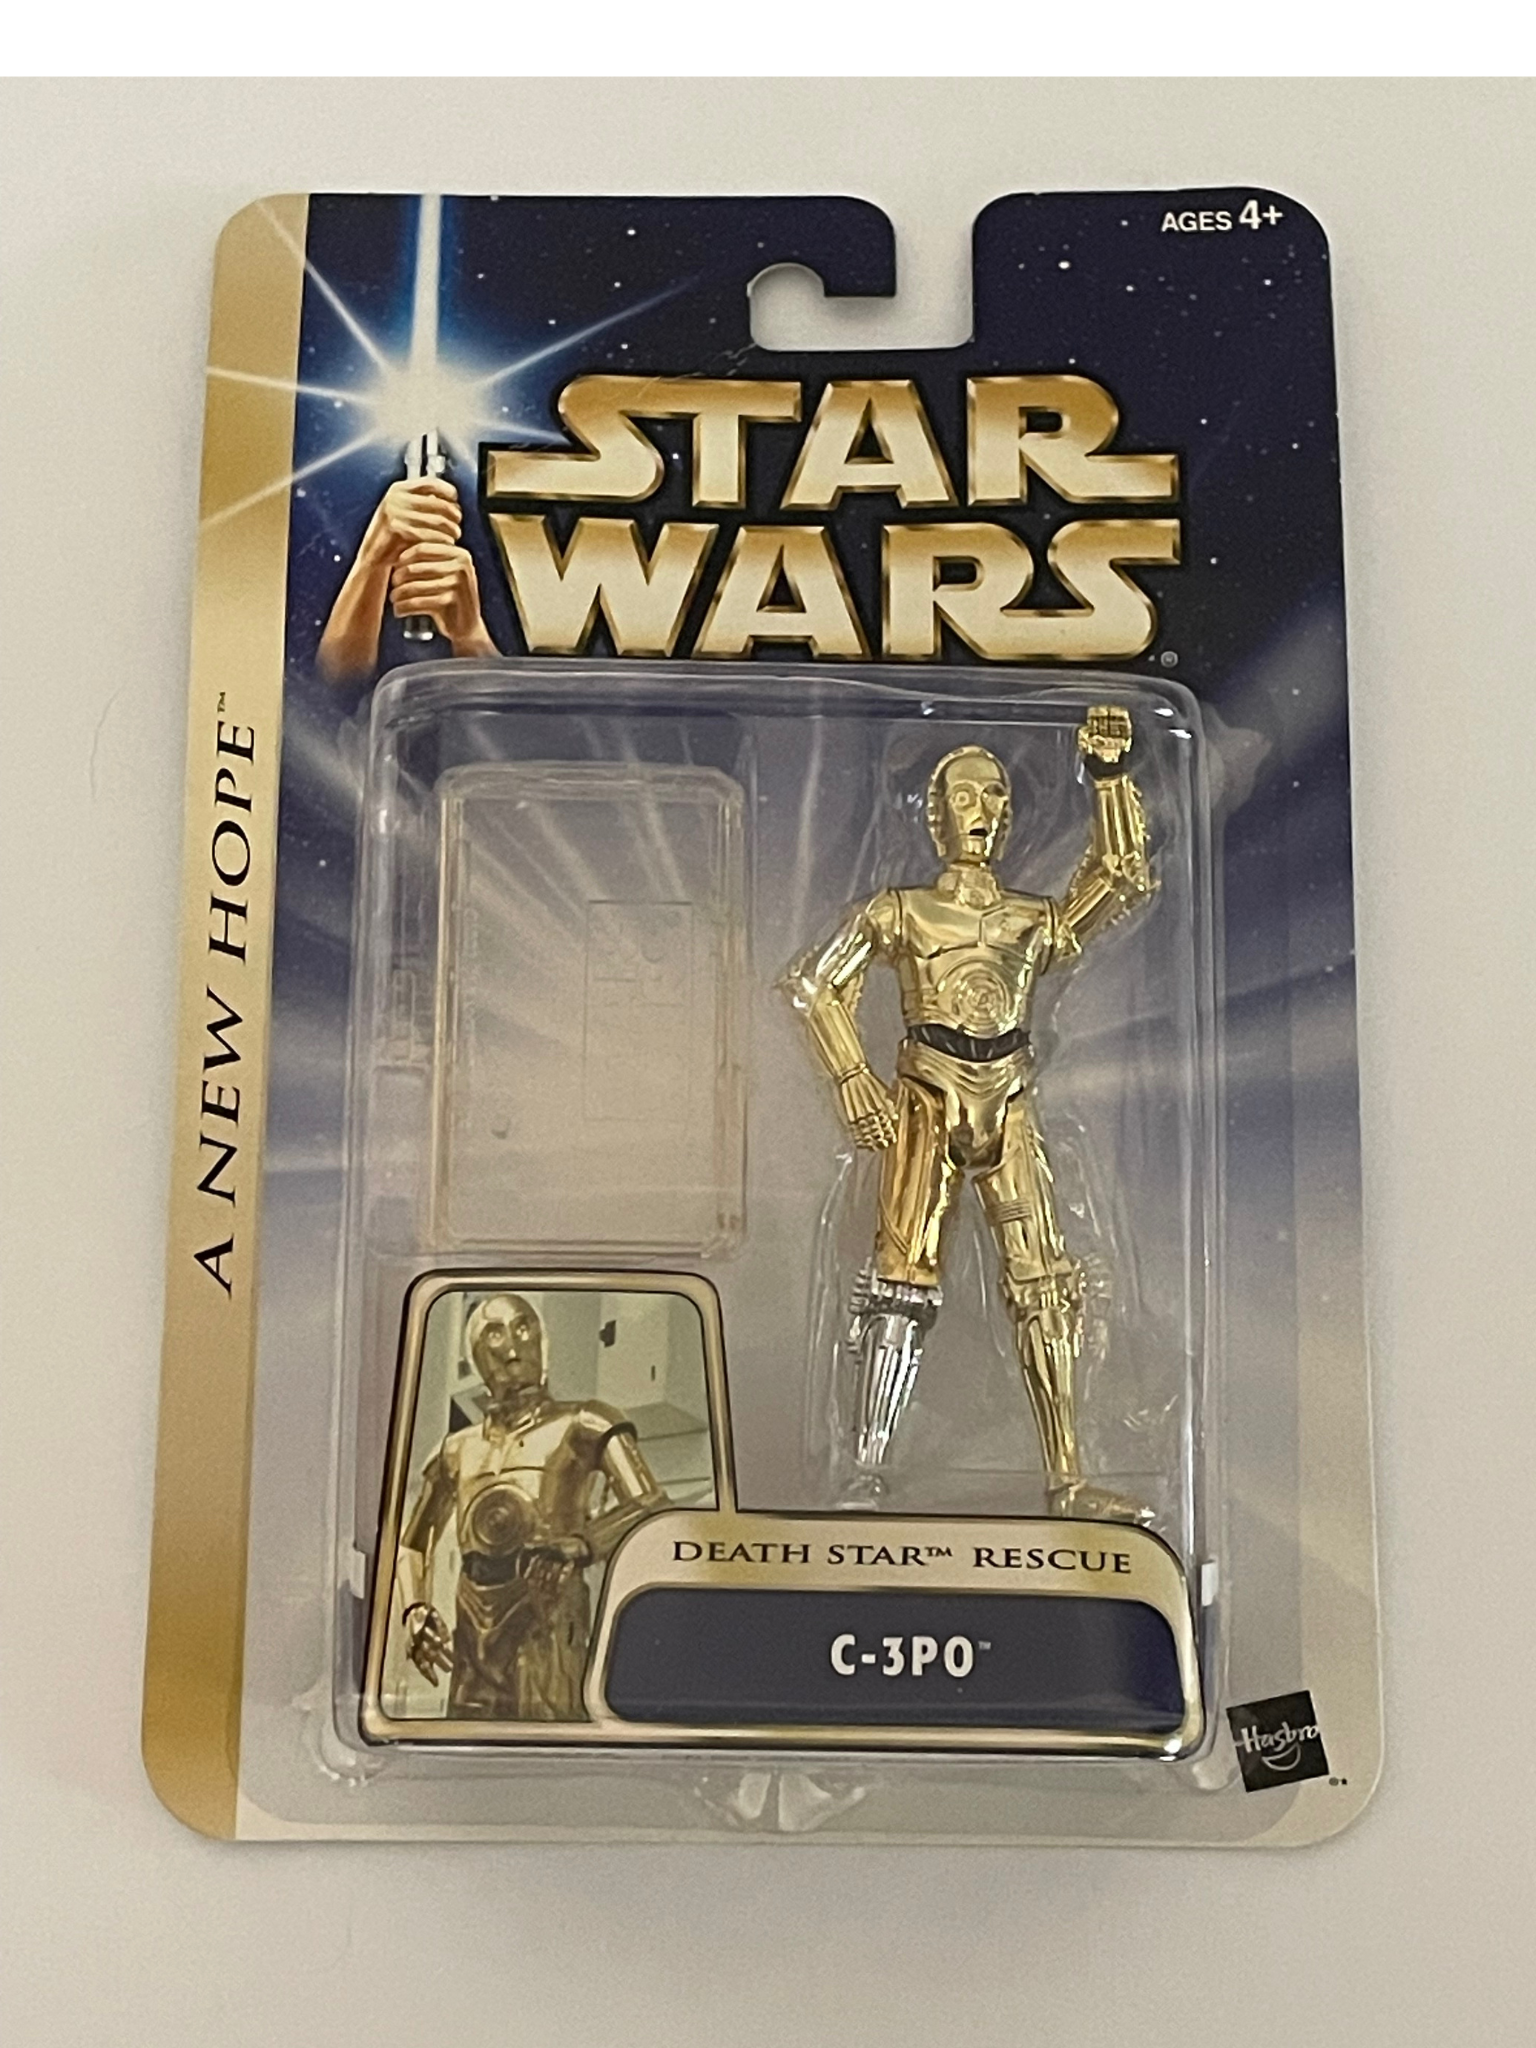 2004 Star Wars A New Hope C-3PO Action figures